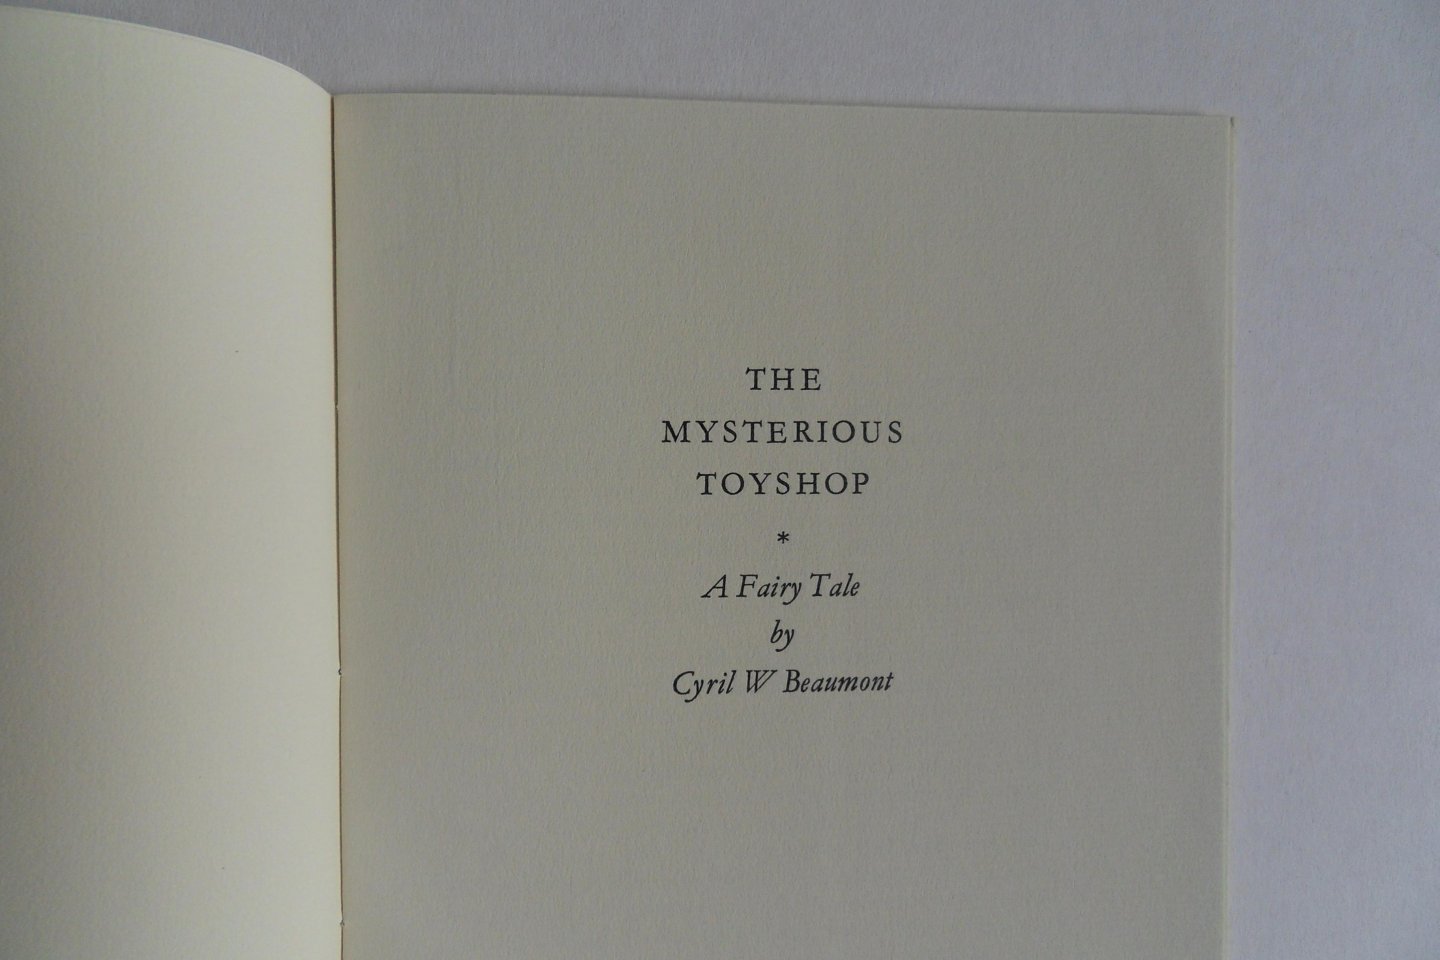 Beaumont, Cyril W. - The mysterious toyshop. - A Fairy Tale. [ Beperkte oplage ].